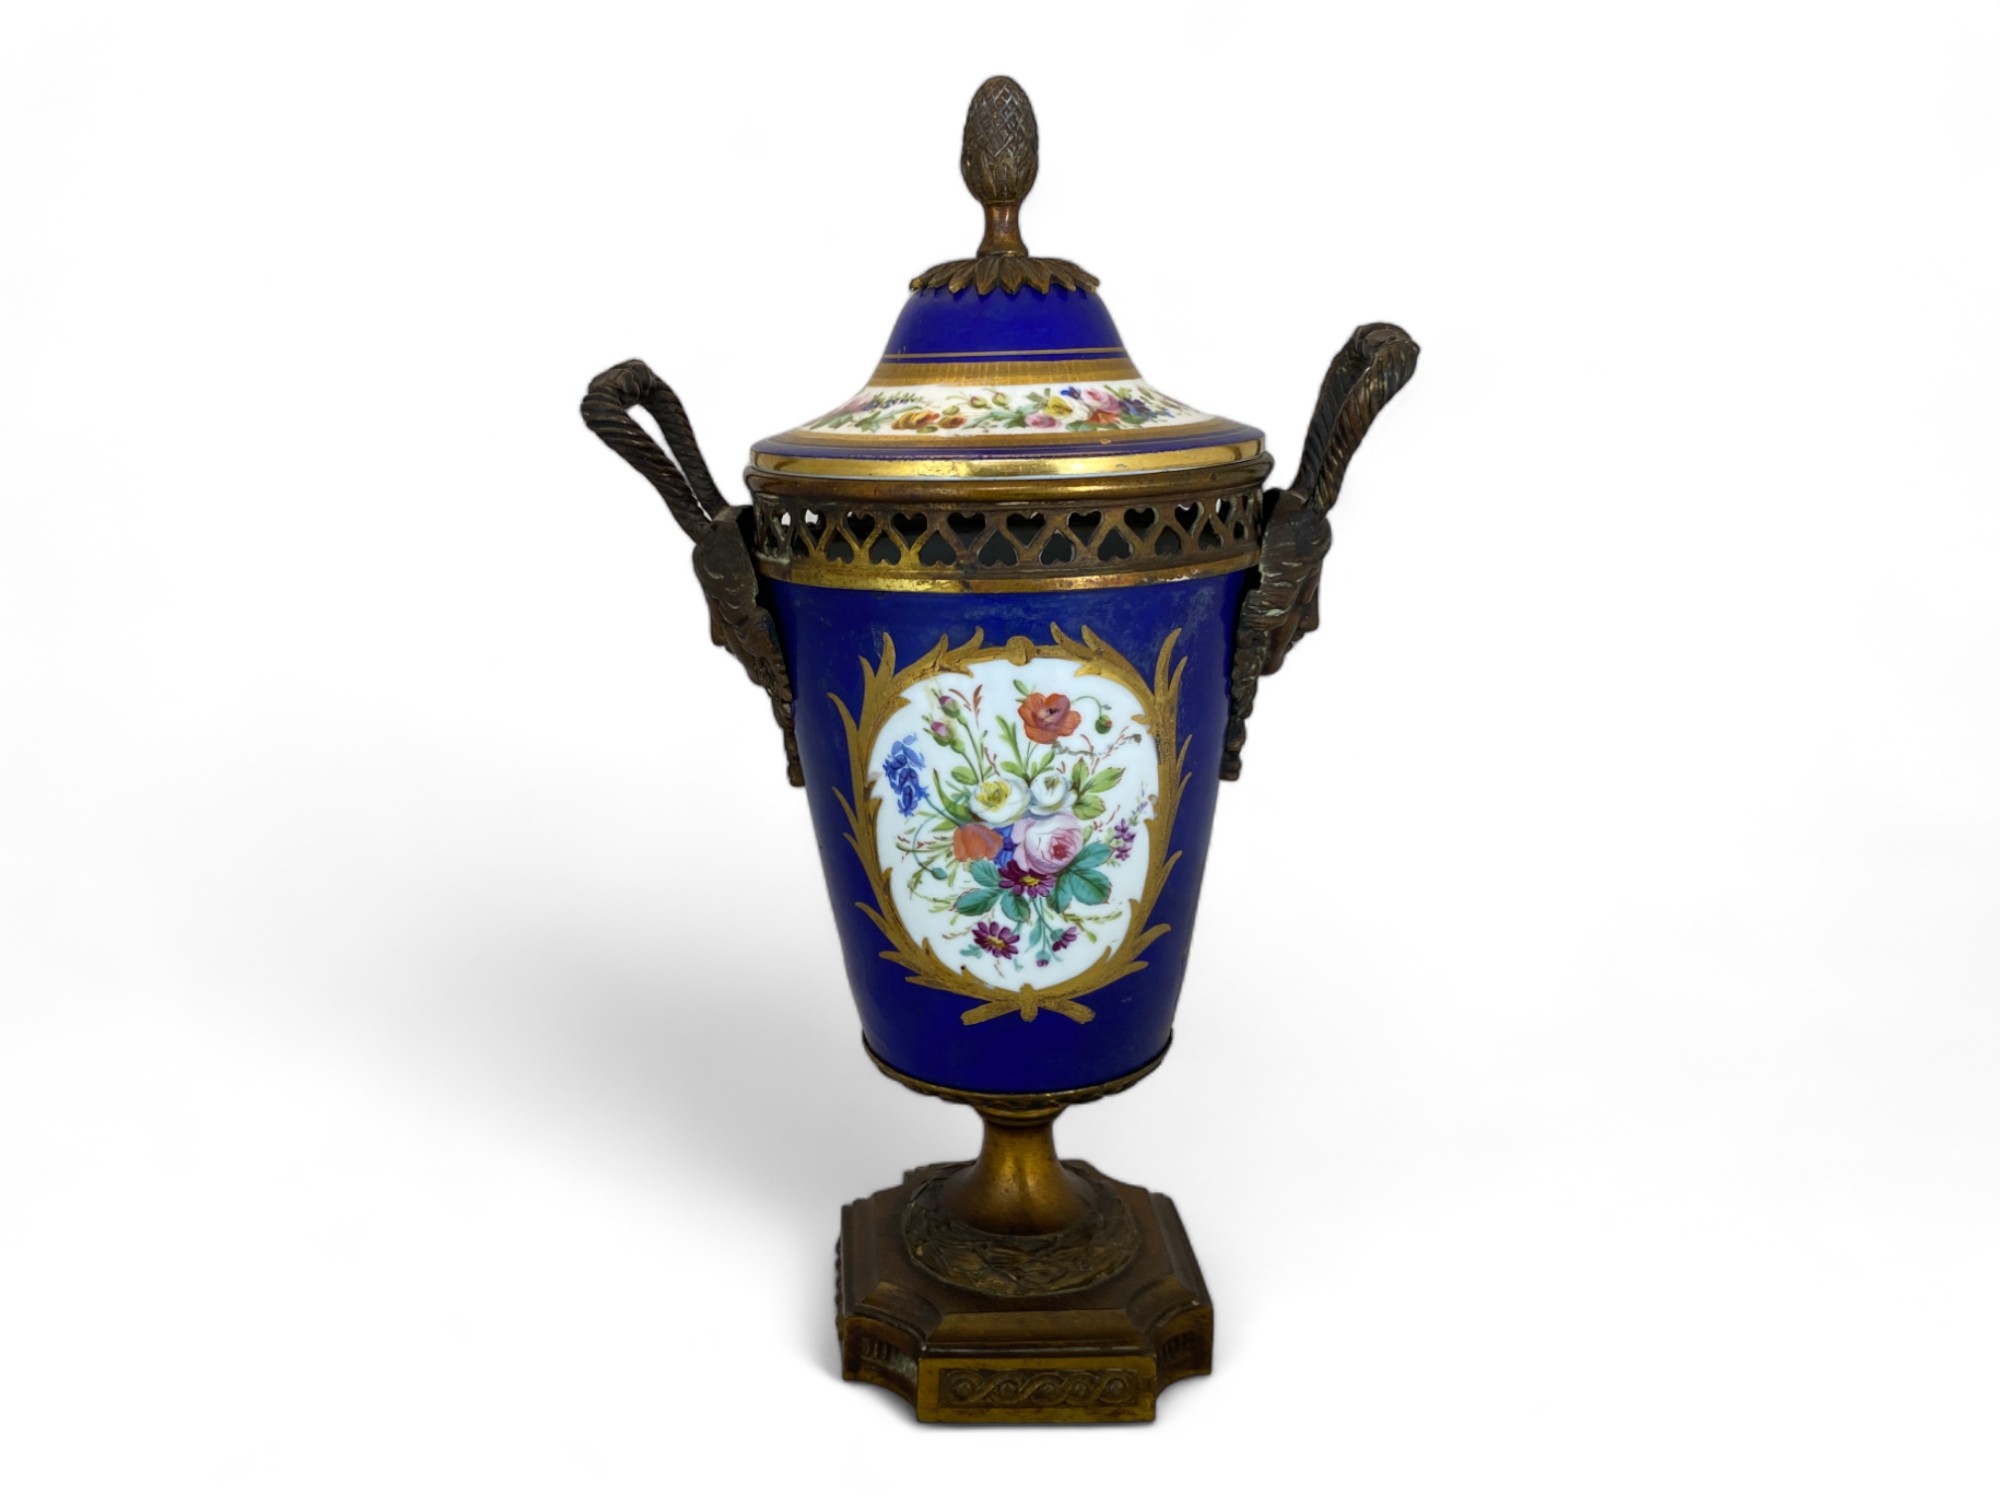 A 19th century Sèvres style porcelain and gilt bronze mounted beau bleu cup and cover - Image 3 of 10